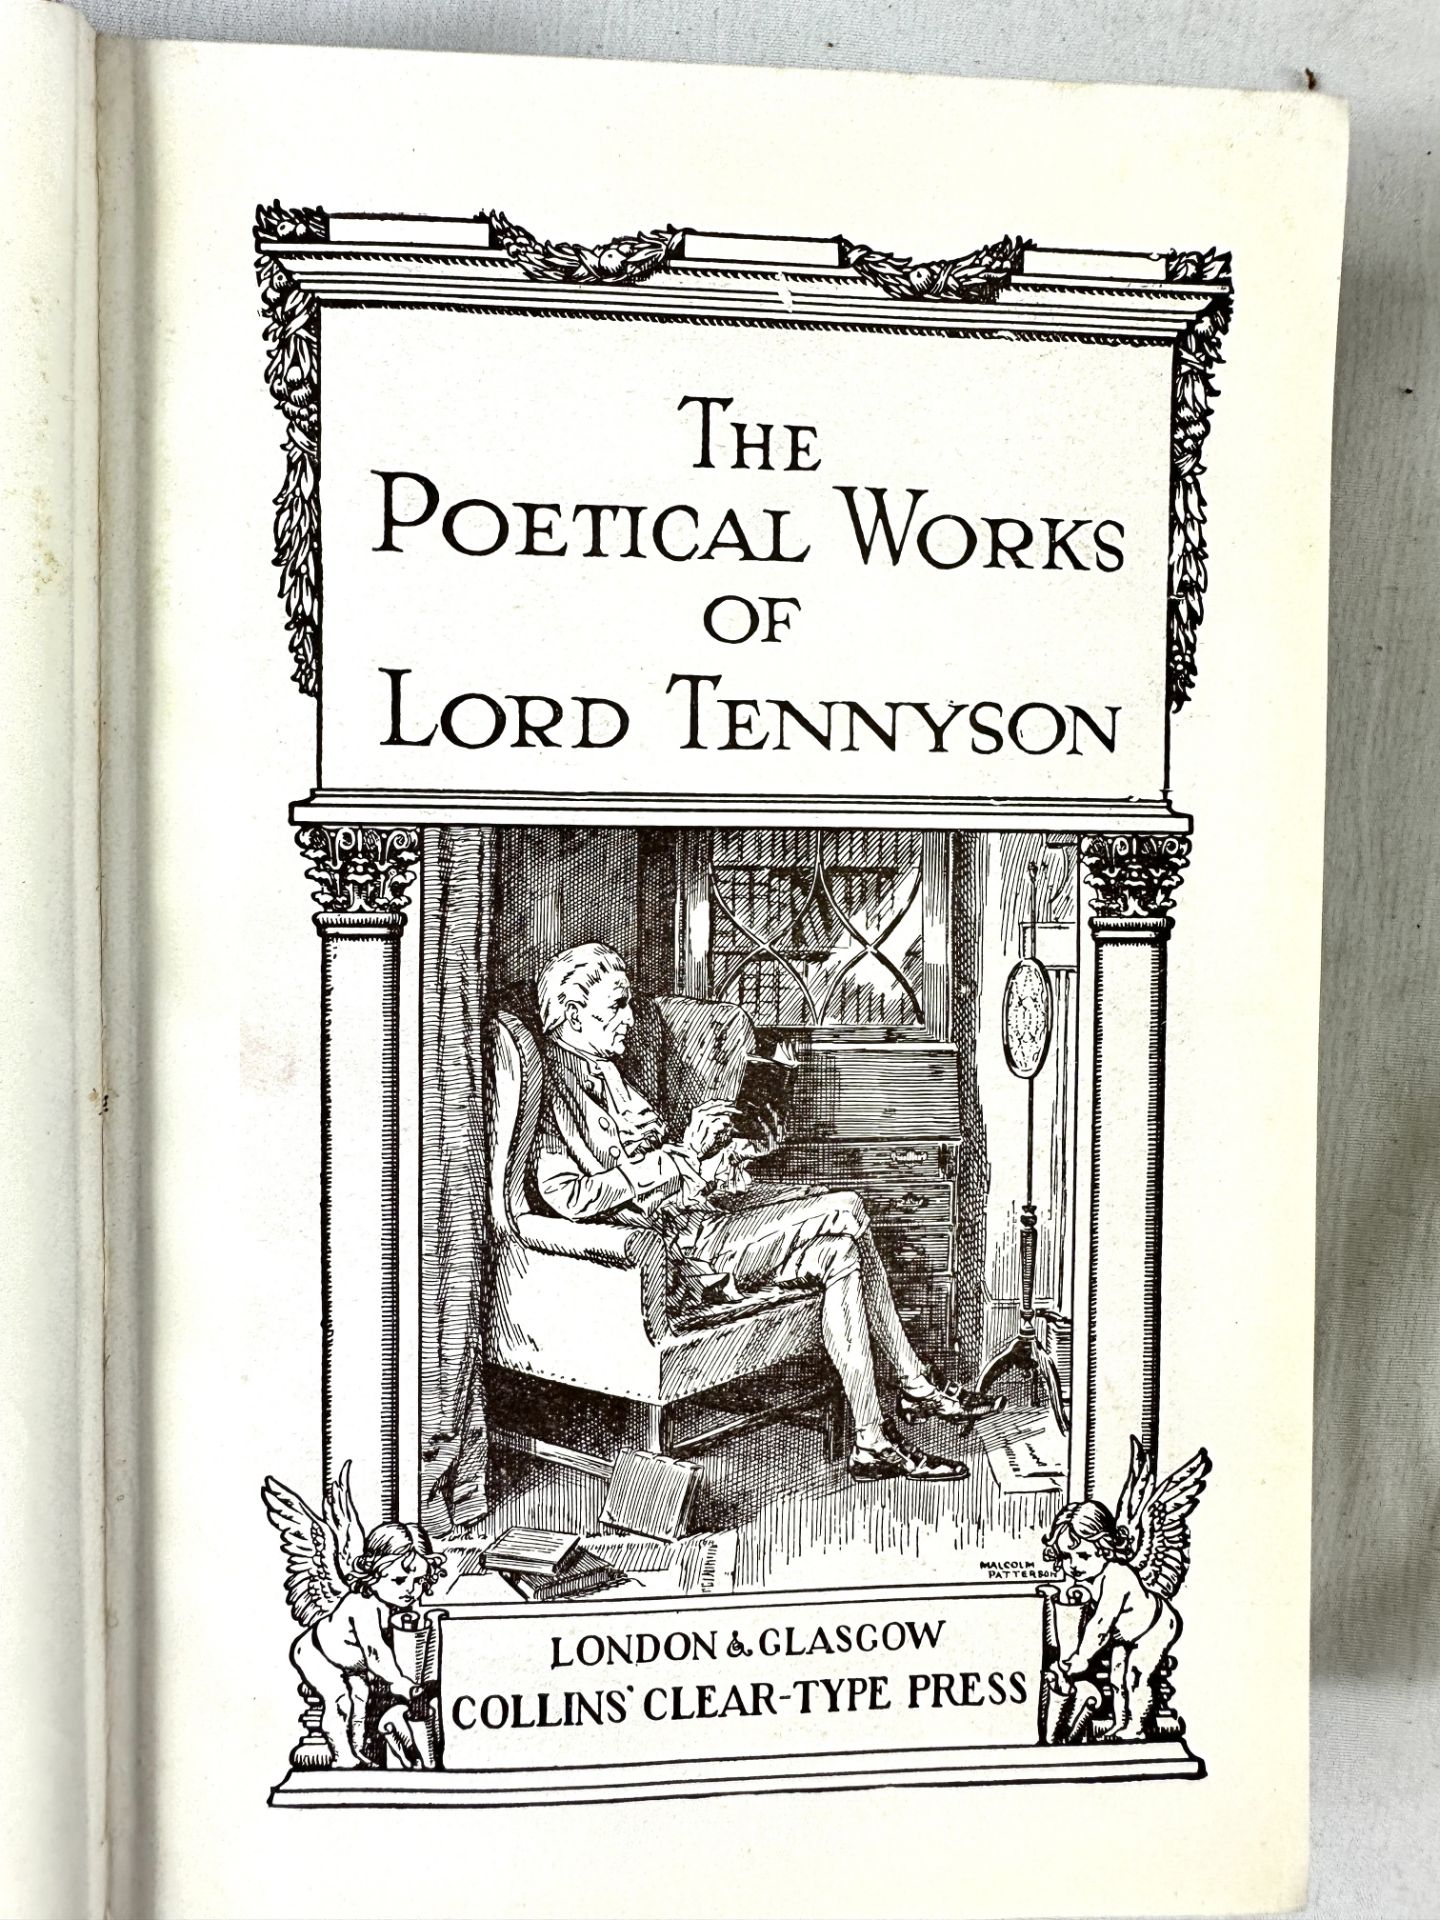 The Works of Alfred Lord Tennyson and other books - Image 3 of 4